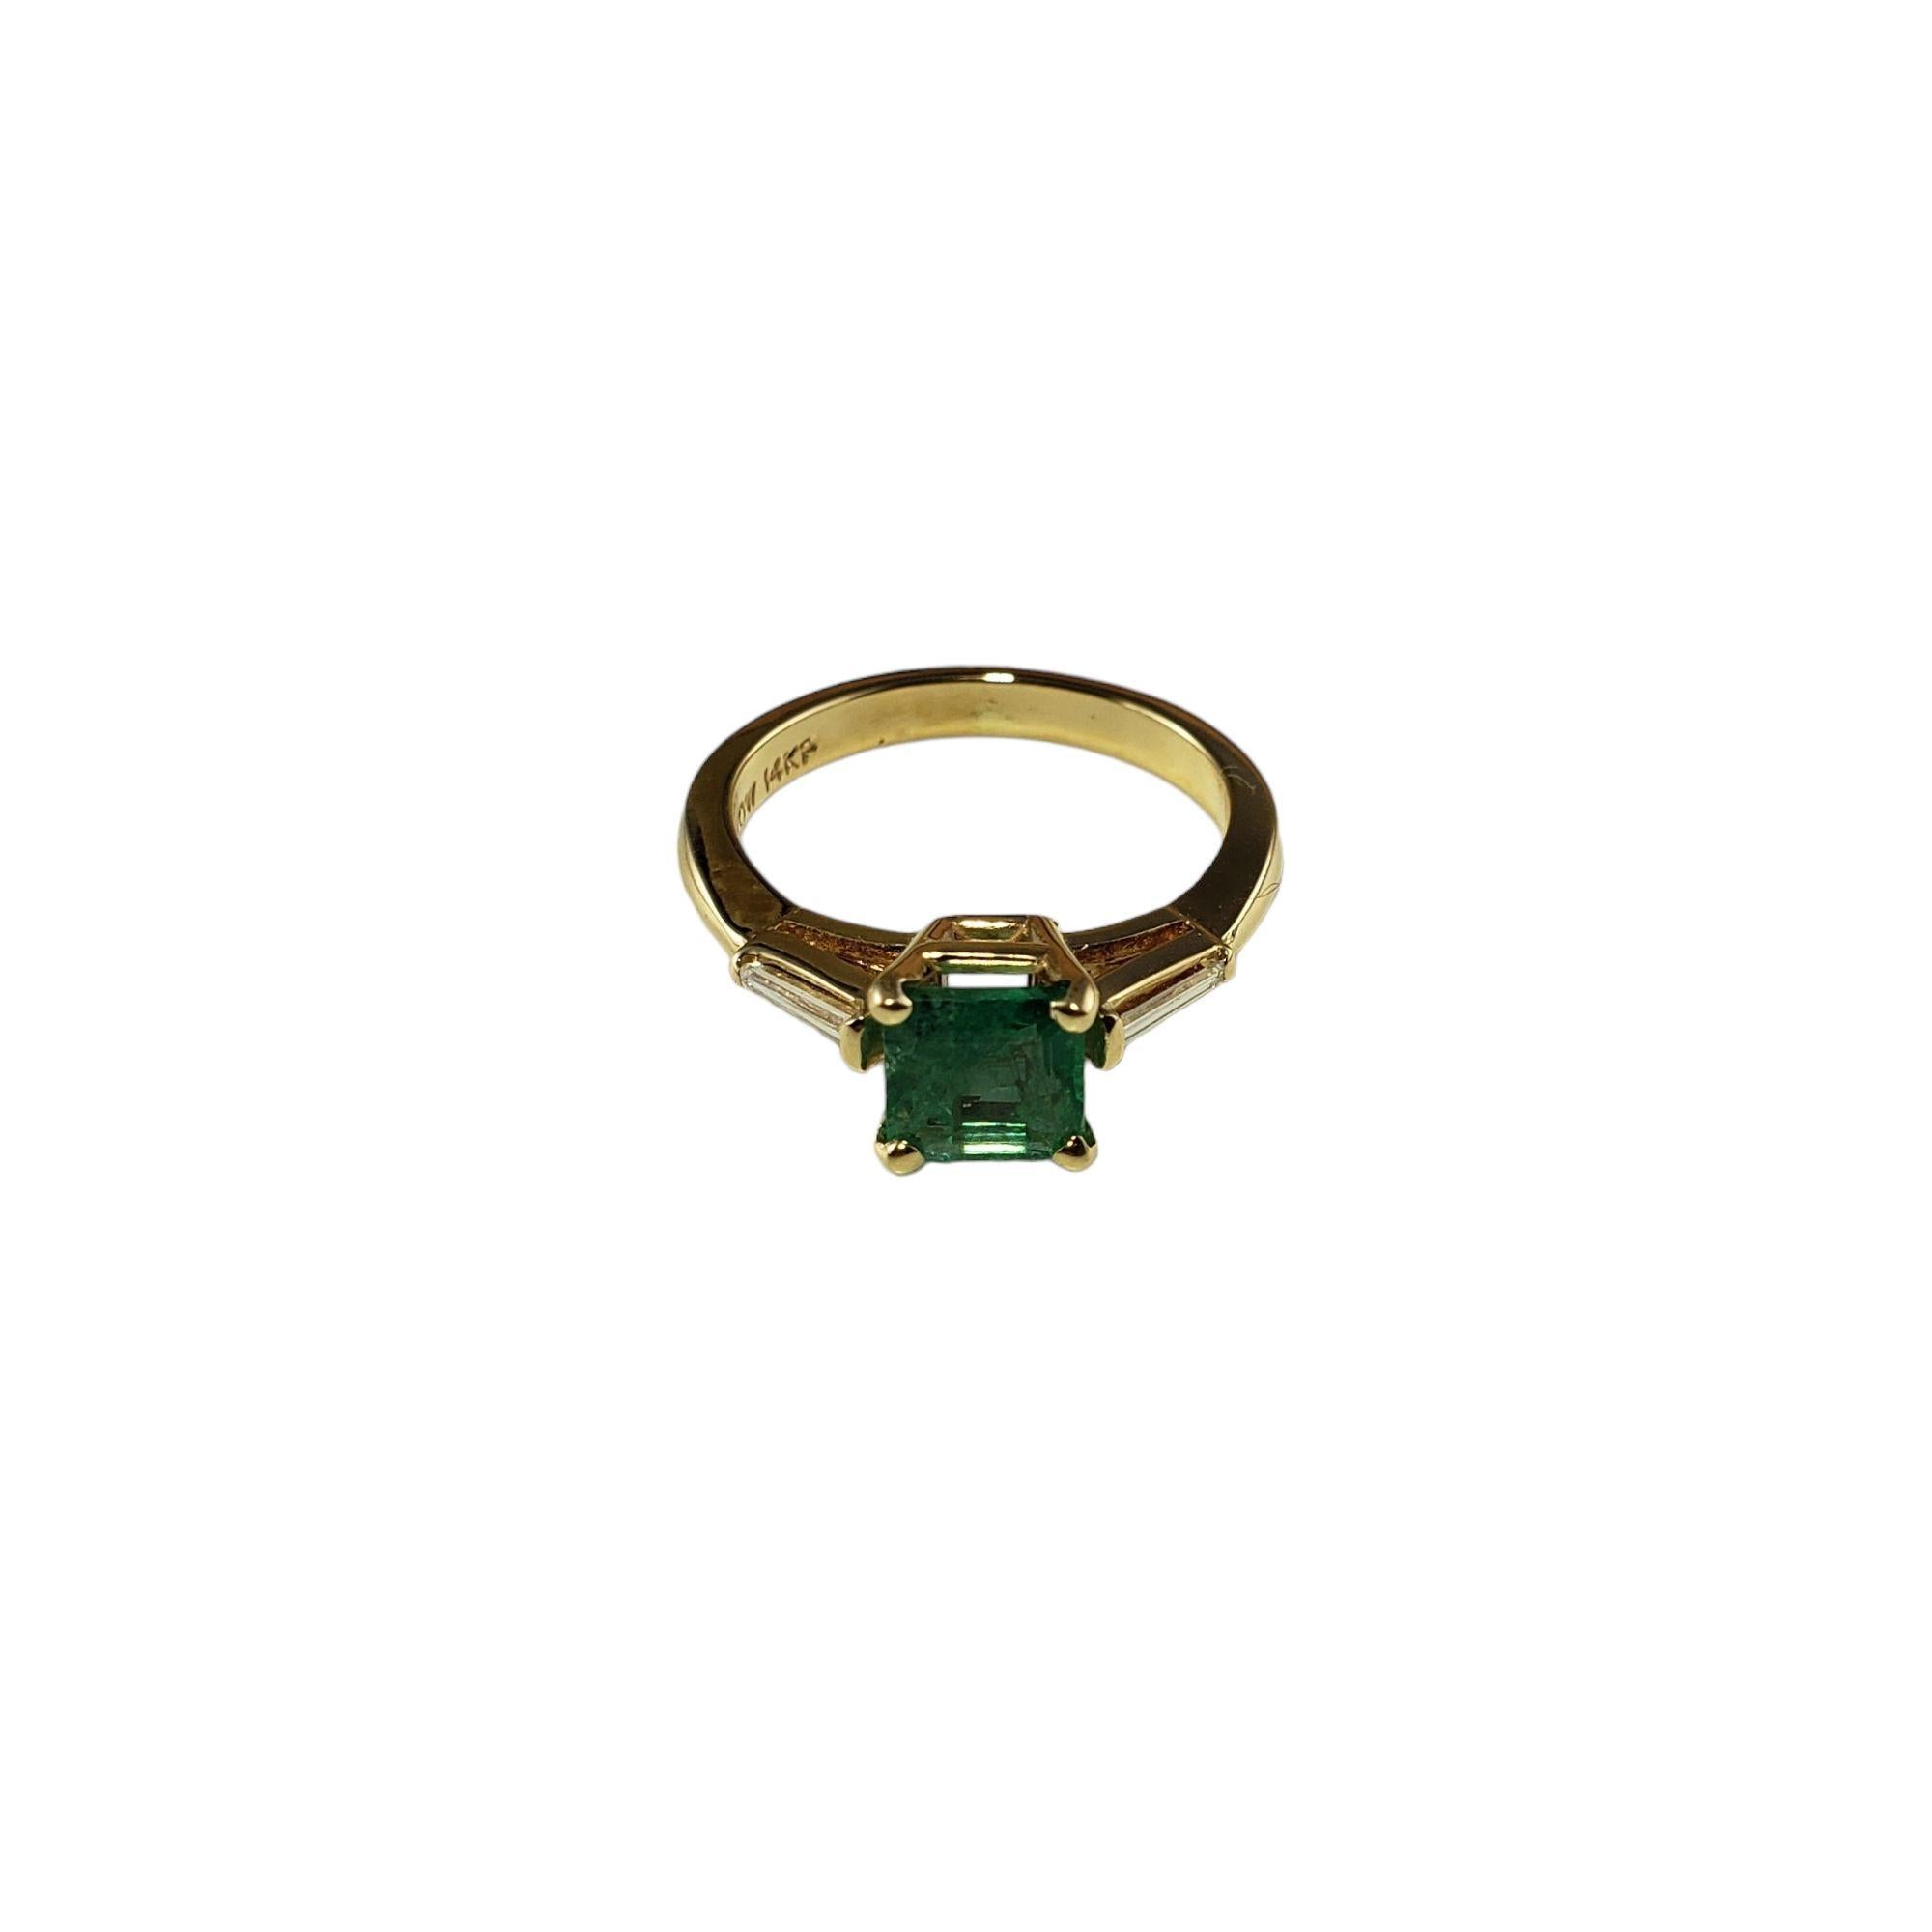  14 Karat Yellow Gold Emerald and Diamond Ring Size 6 #14334 In Good Condition For Sale In Washington Depot, CT